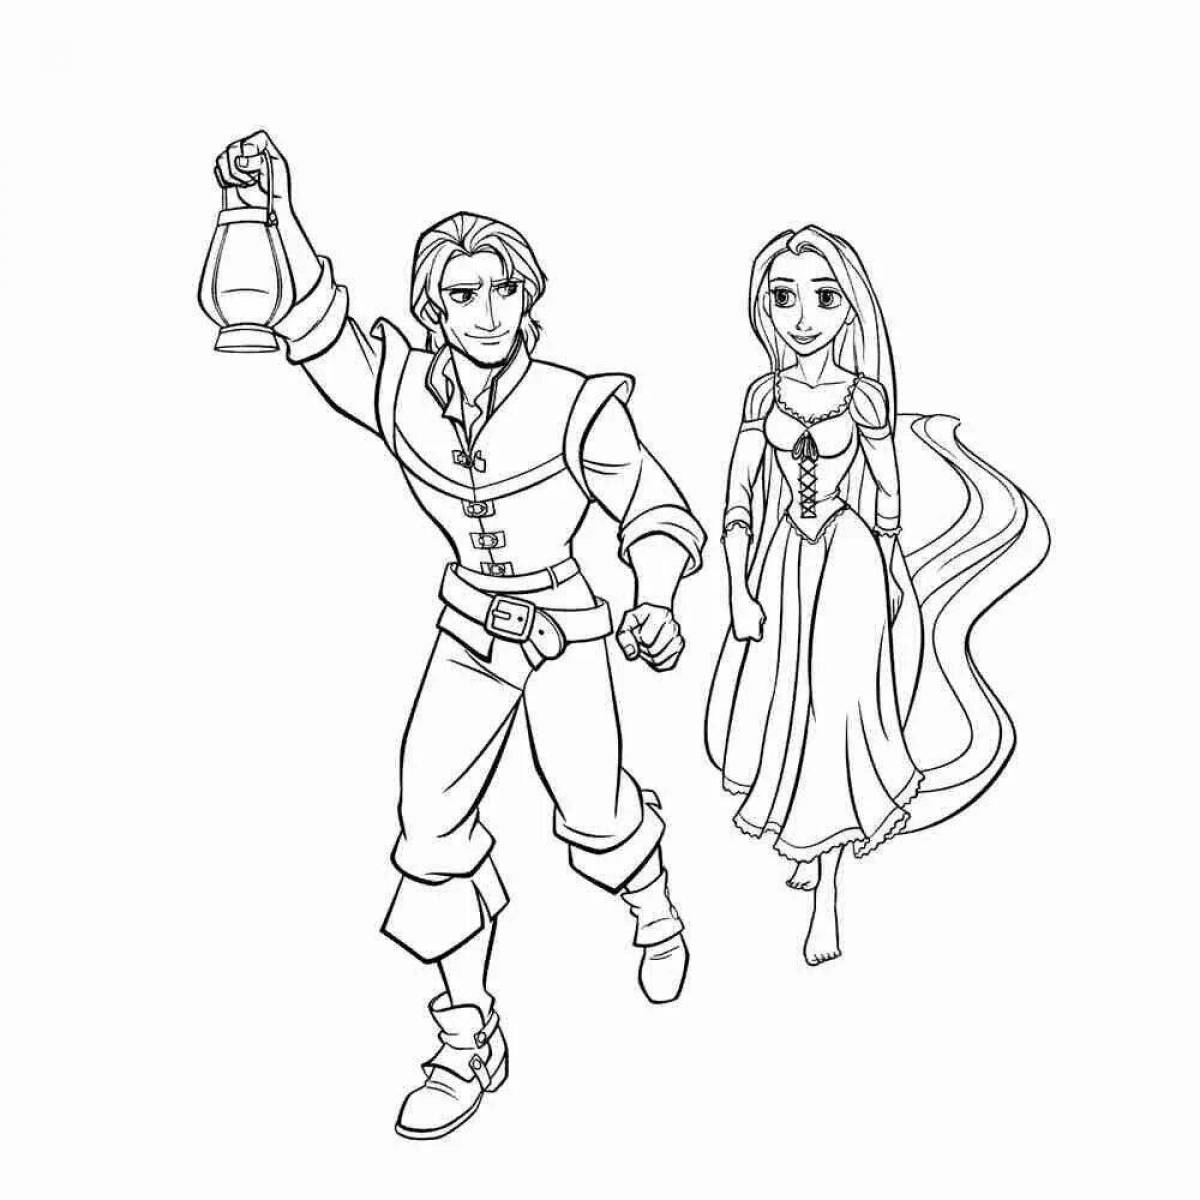 Tangled and Eugene's dazzling coloring book